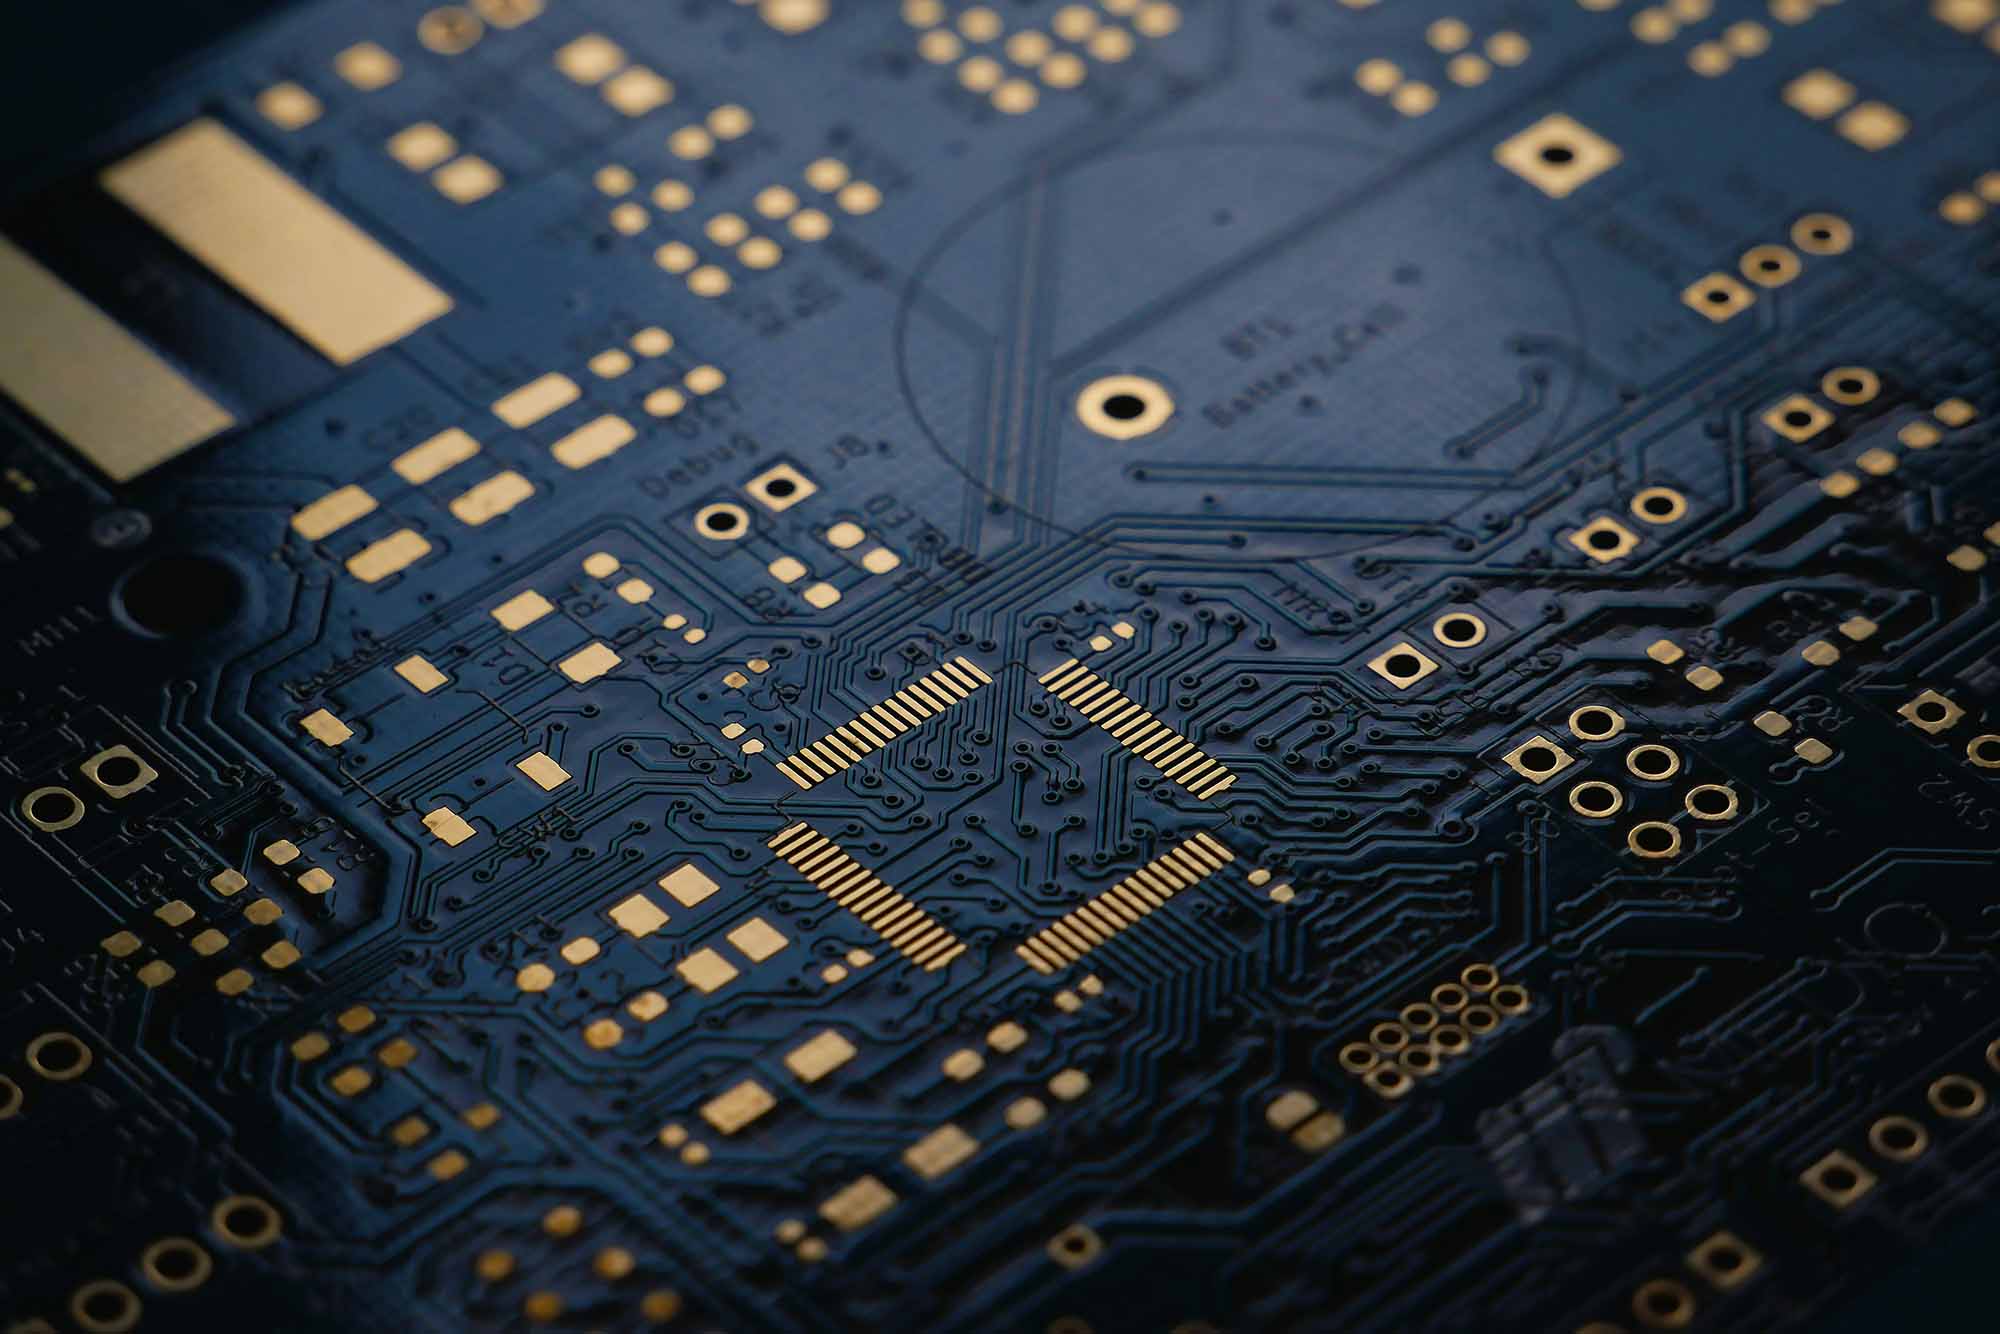 A close-up view of semiconductor circuitry